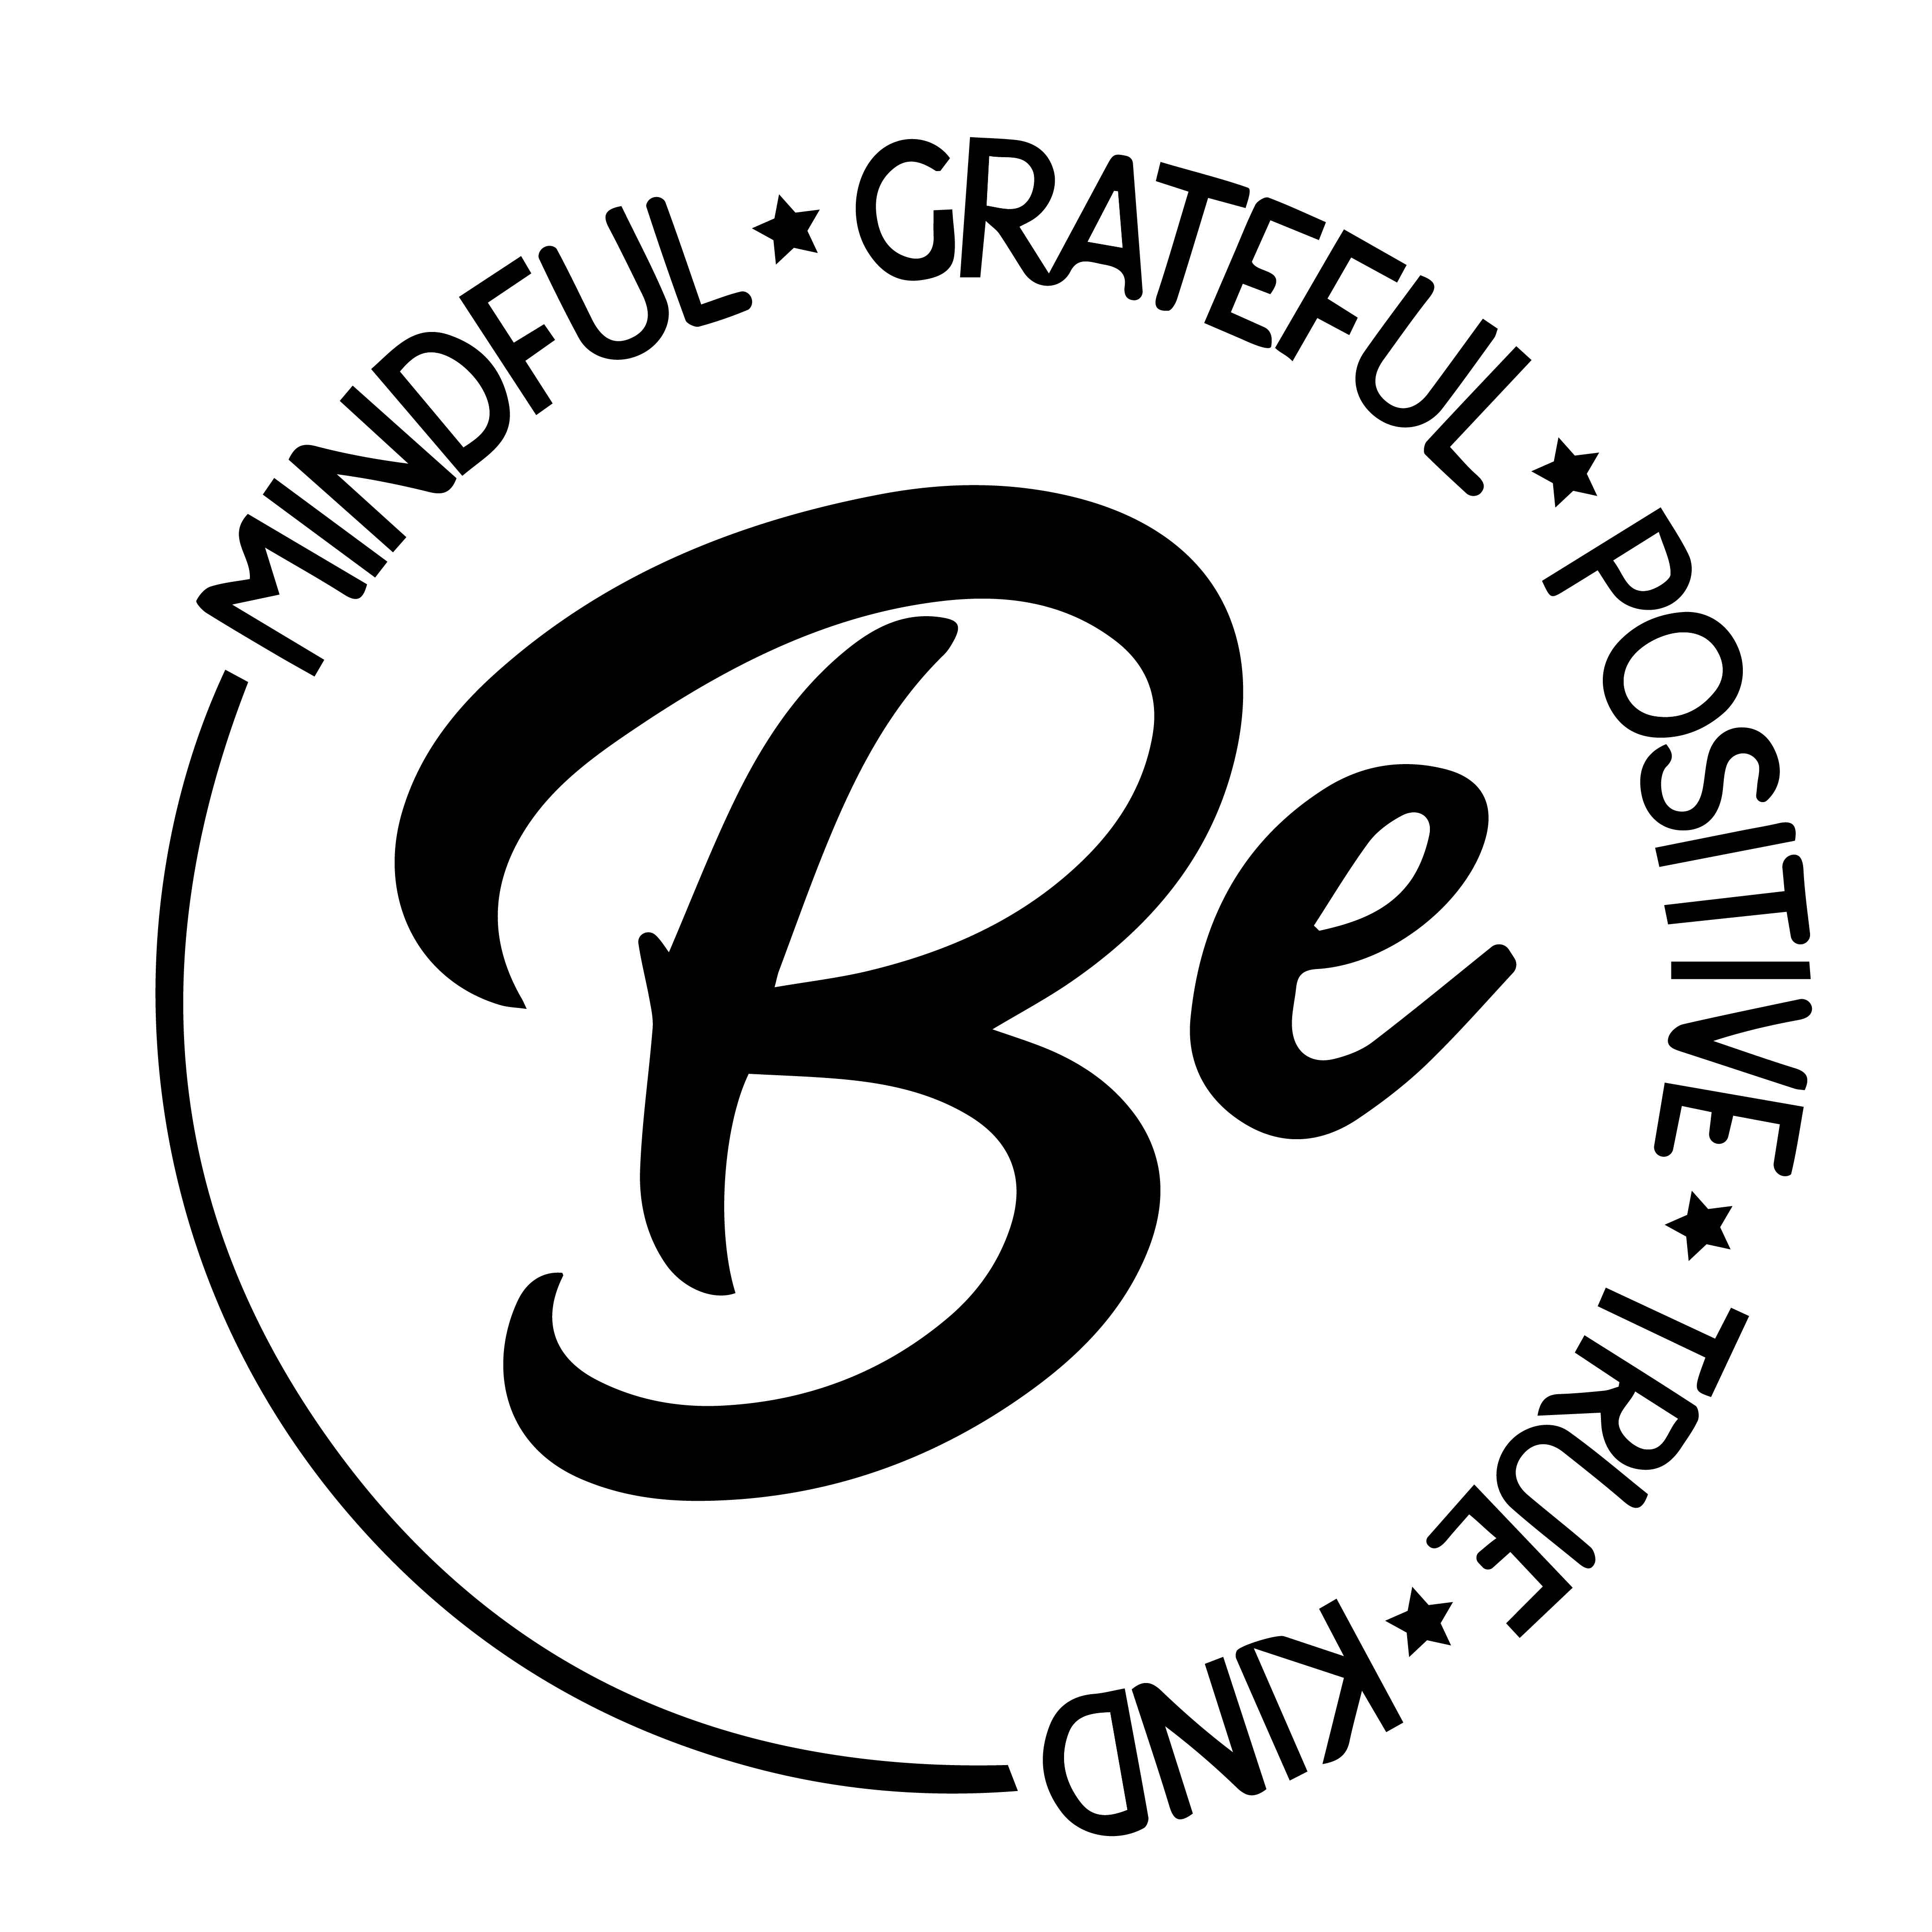 be mindful grateful positive true and kind 01 11zon 548